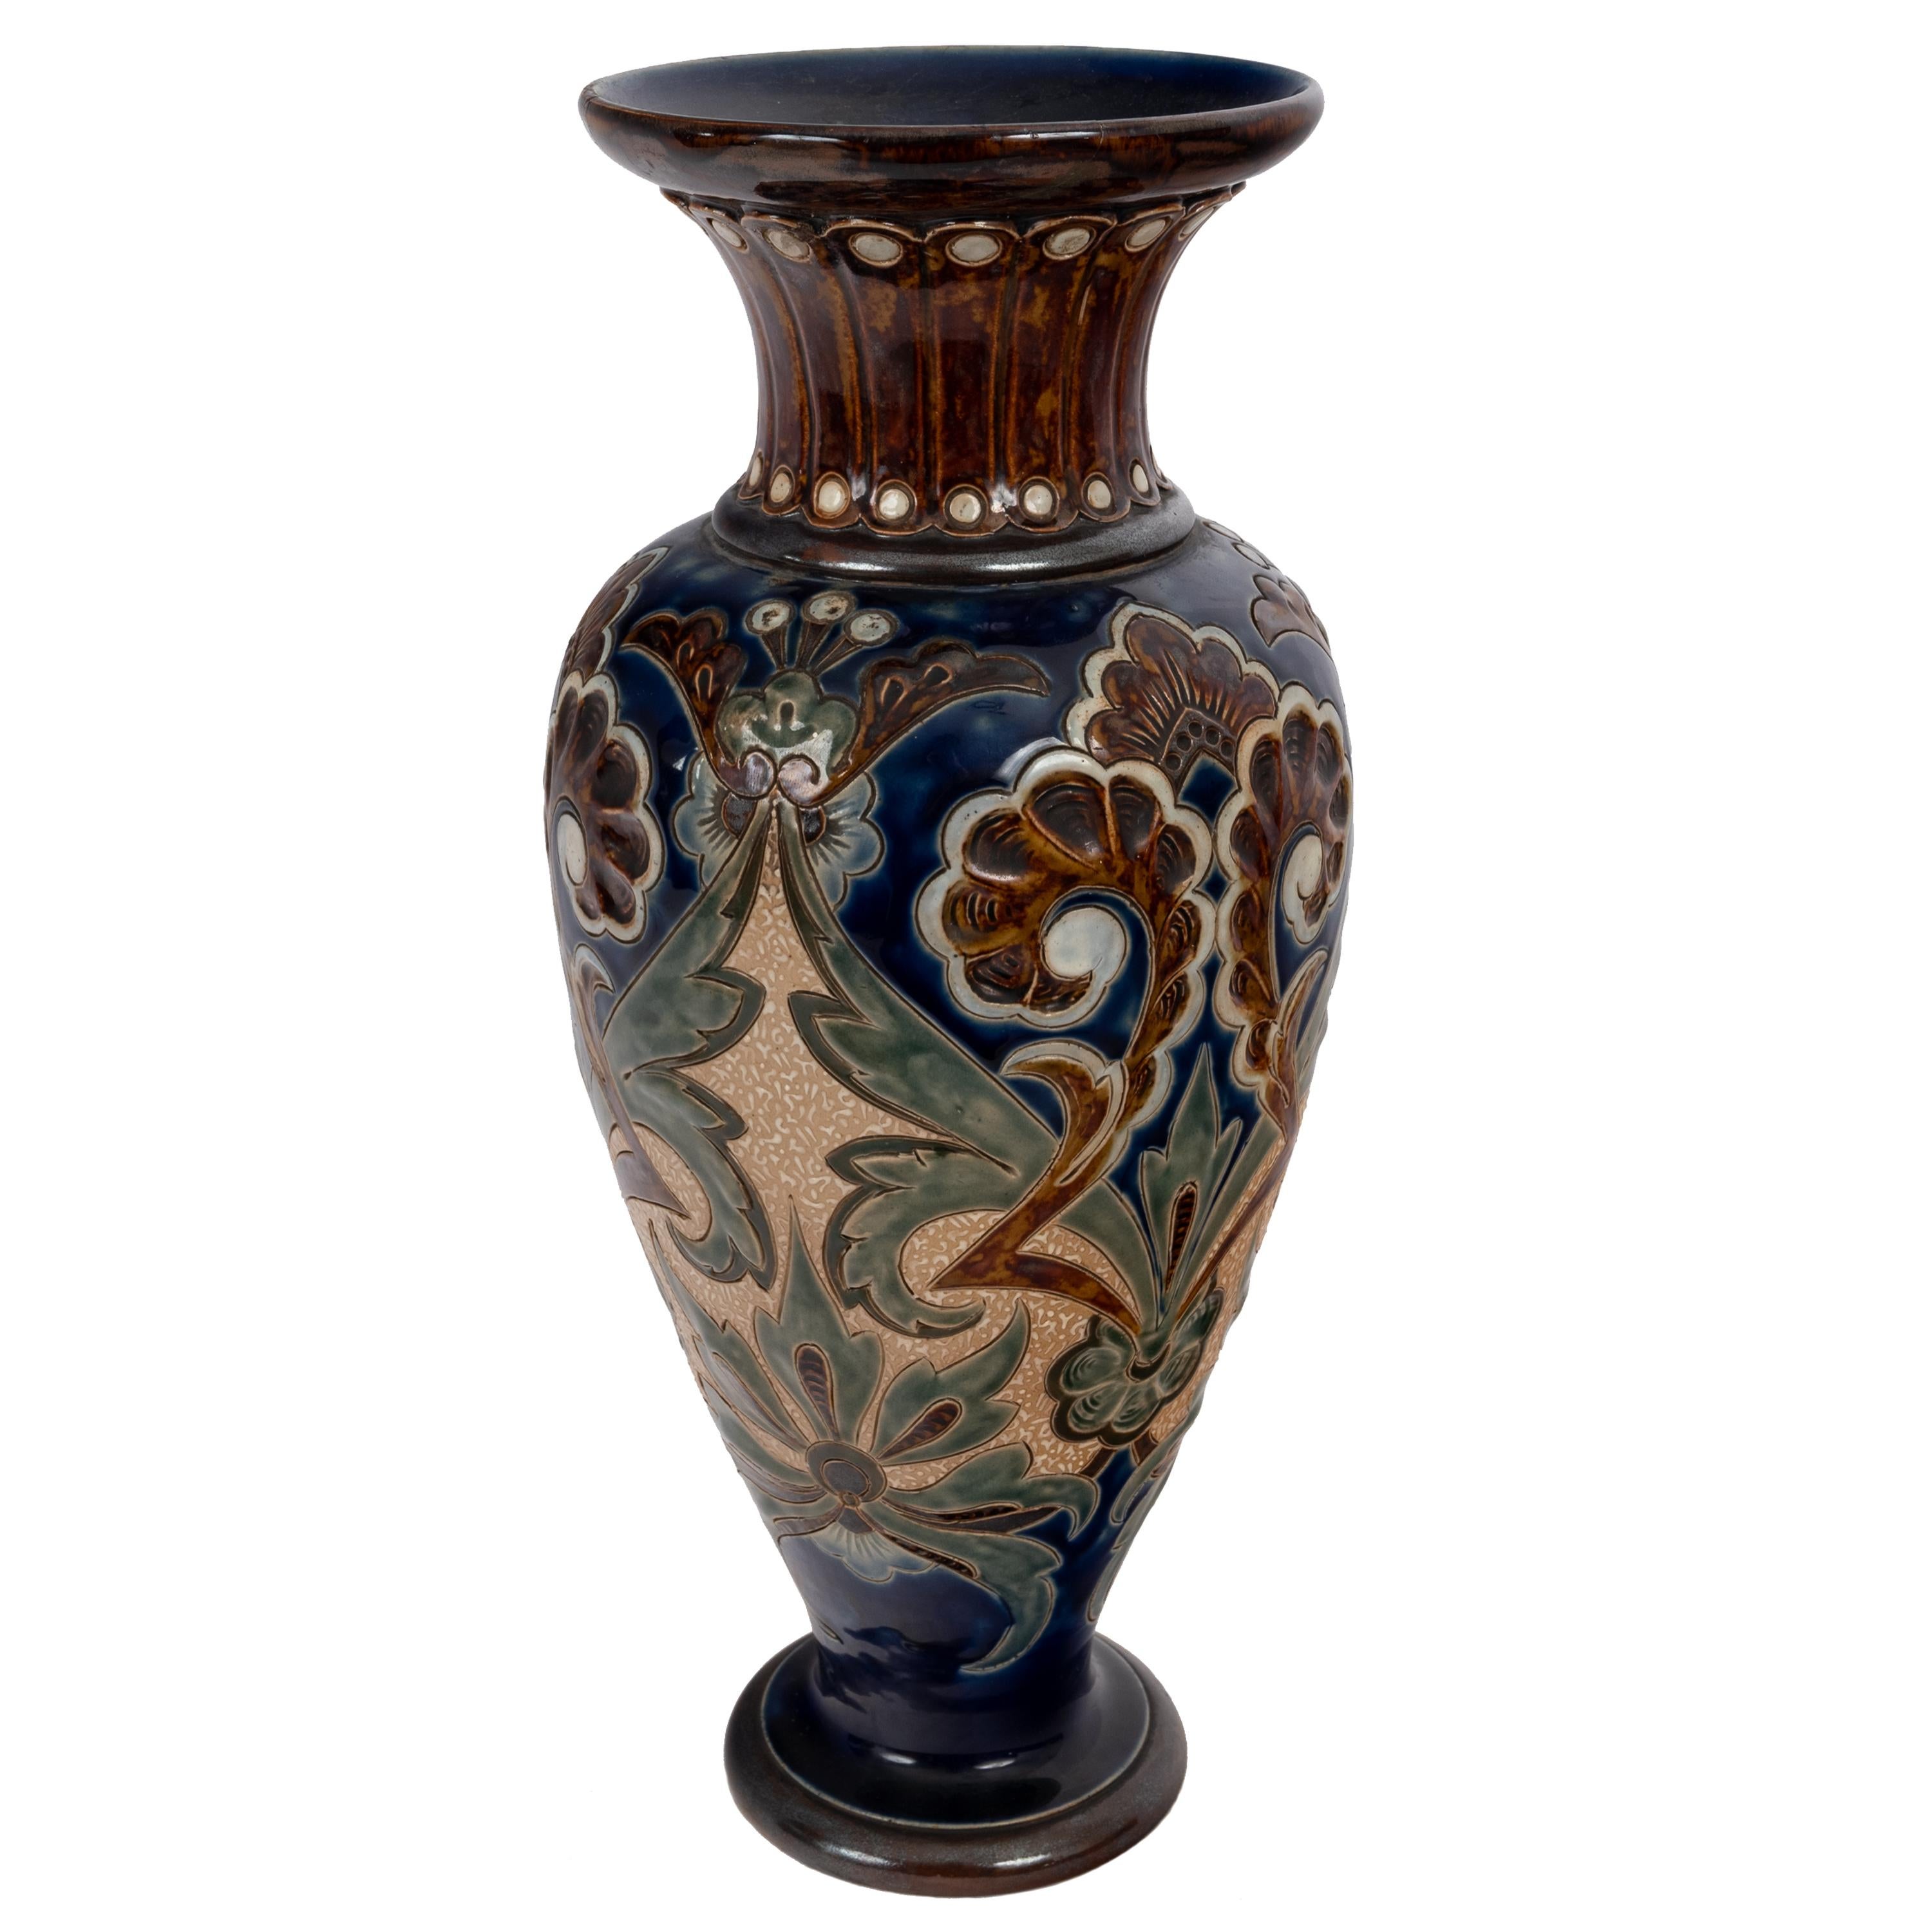 A good large antique Aesthetic Movement Doulton Lambeth stoneware pottery vase, 1883.
The vase decorated in the Aesthetic taste, with an complex incised design and rich glazing. The base having the Doulton Lambeth mark dating from 1882-1891 and the